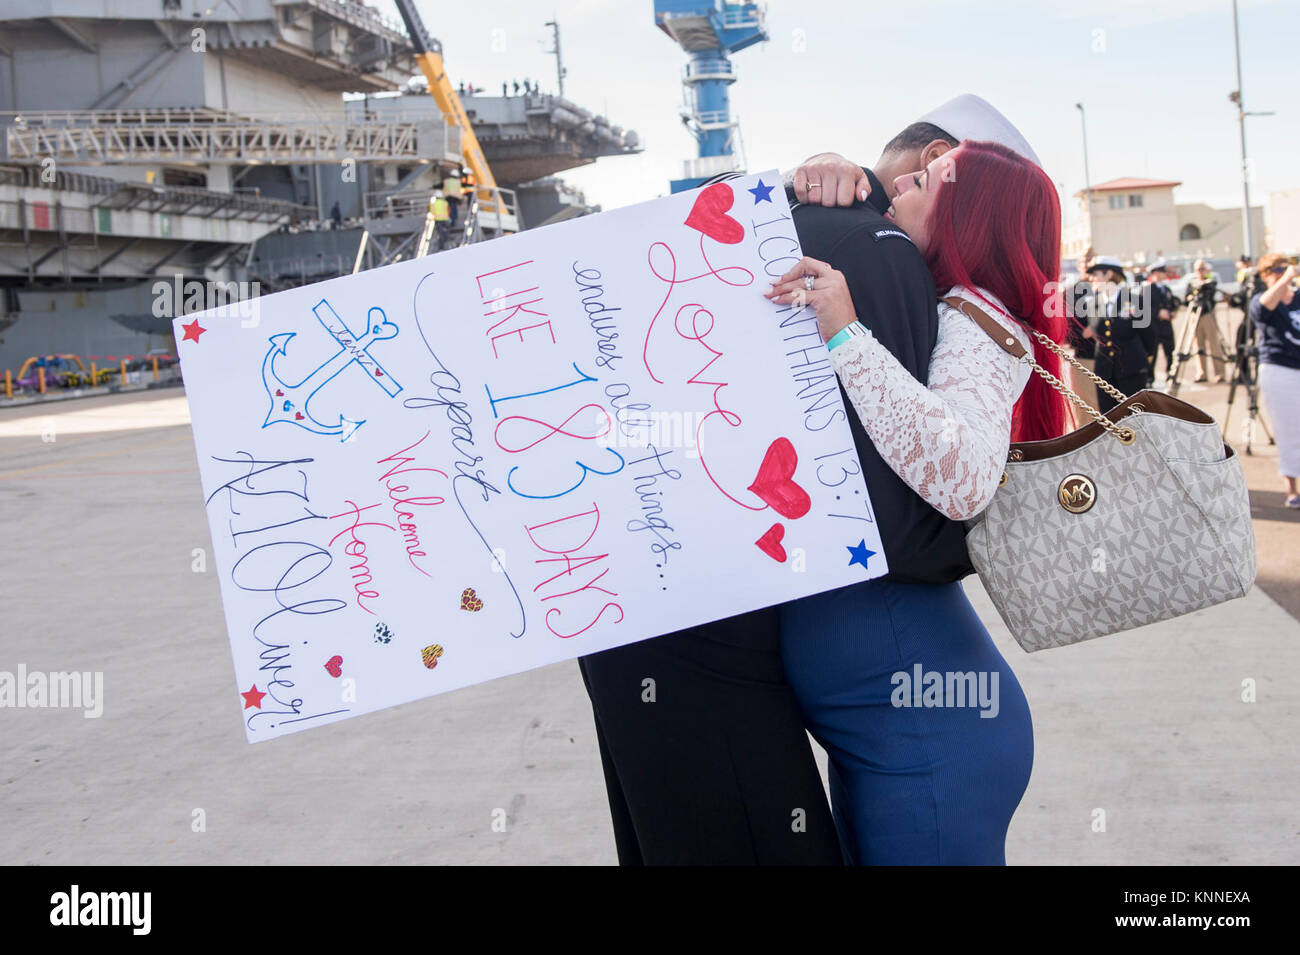 DIEGO (Dec. 05, 2017) Aviation Maintenance Administrationman 1st Class Corey Oliver hugs his pregnant wife after returning from deployment aboard USS Nimitz. The Nimitz Carrier Strike Group is on a regularly scheduled deployment to the Western Pacific. The U.S. Navy has patrolled the Indo-Asia-Pacific region routinely for more than 70 years, prompting peace security. (U.S. Navy Stock Photo